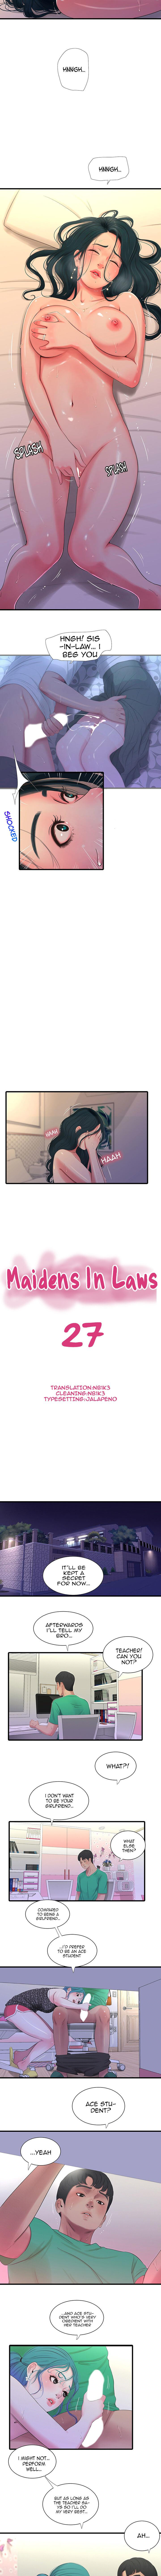 Hot Women Fucking Maidens In-Law | One's In-Laws Virgins Ch. 26-30 [English] Gay Pawnshop - Page 11